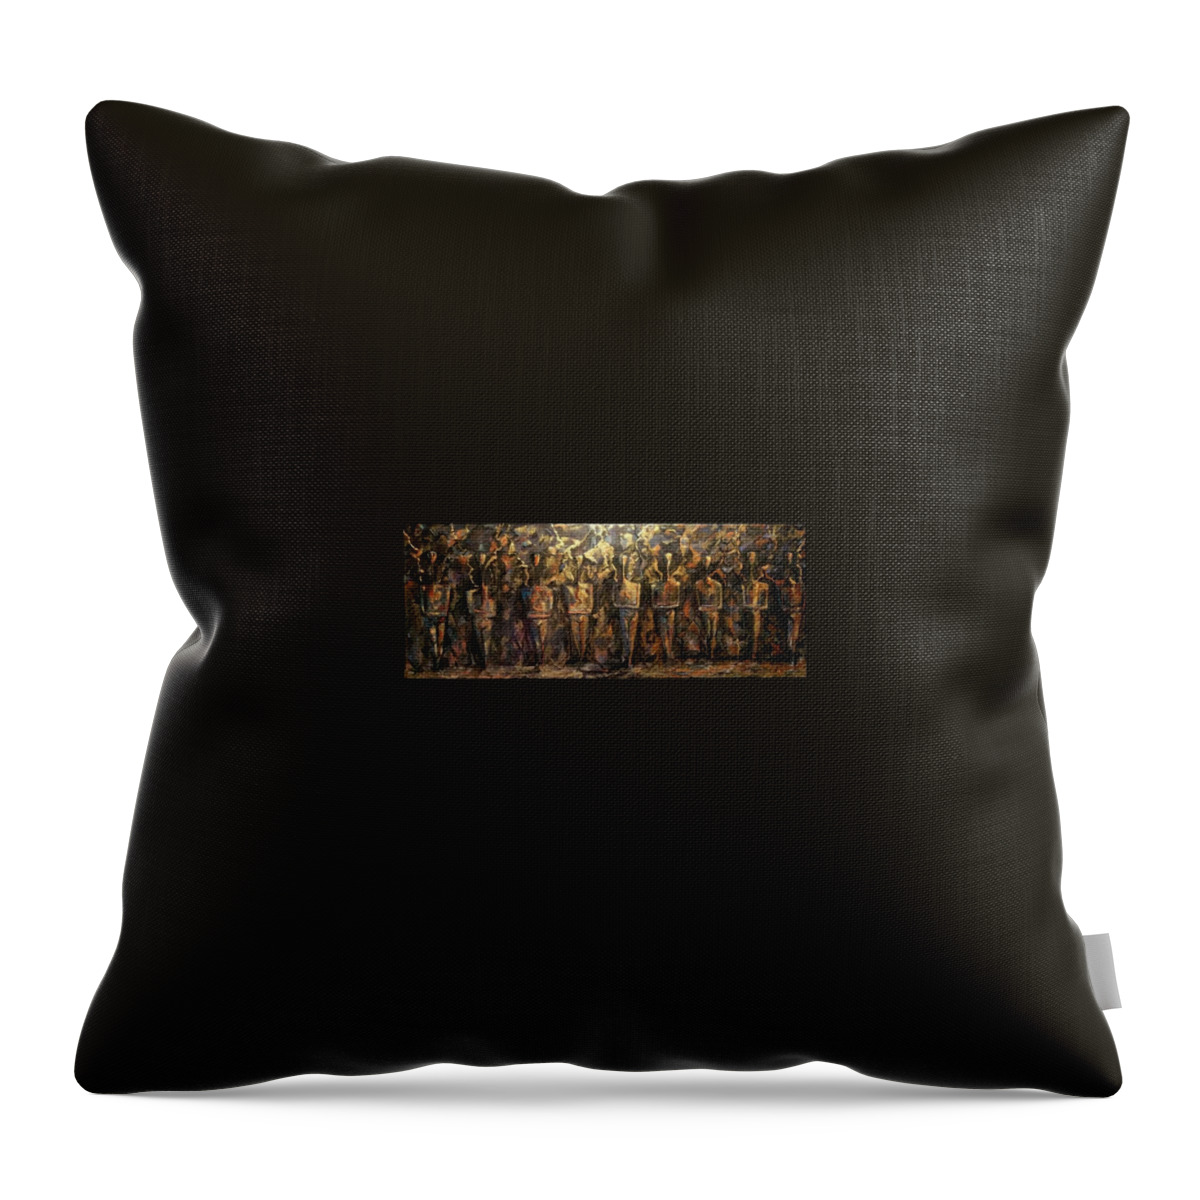  Throw Pillow featuring the painting Immortals by James Lanigan Thompson MFA